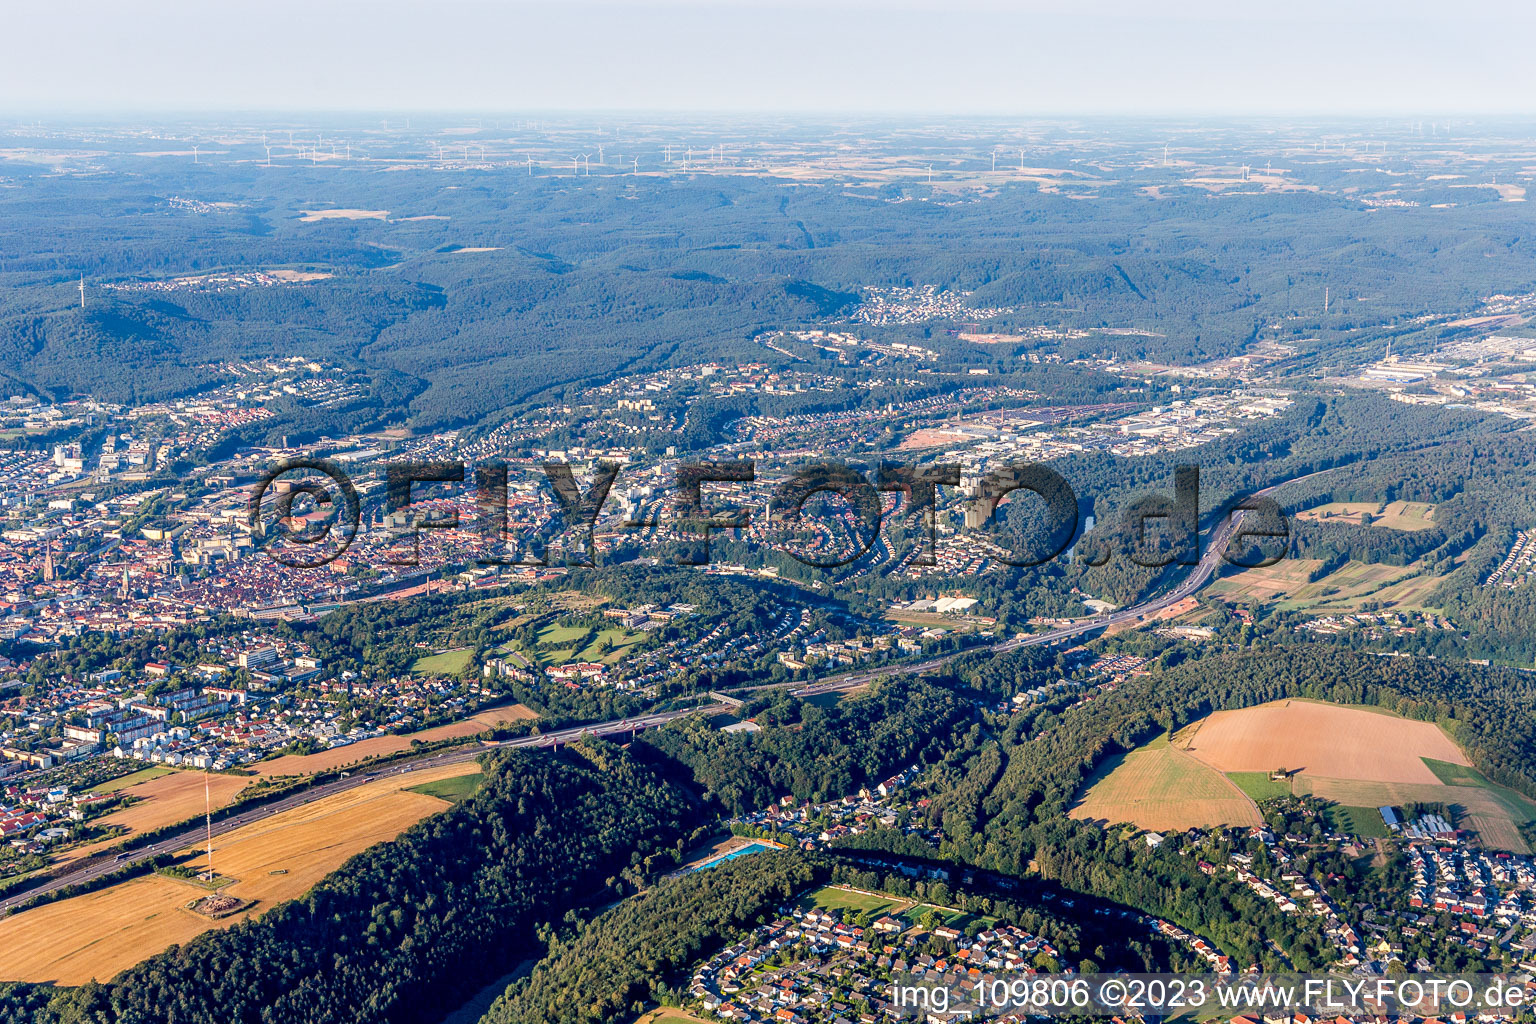 Aerial view of Kaiserslautern in the state Rhineland-Palatinate, Germany